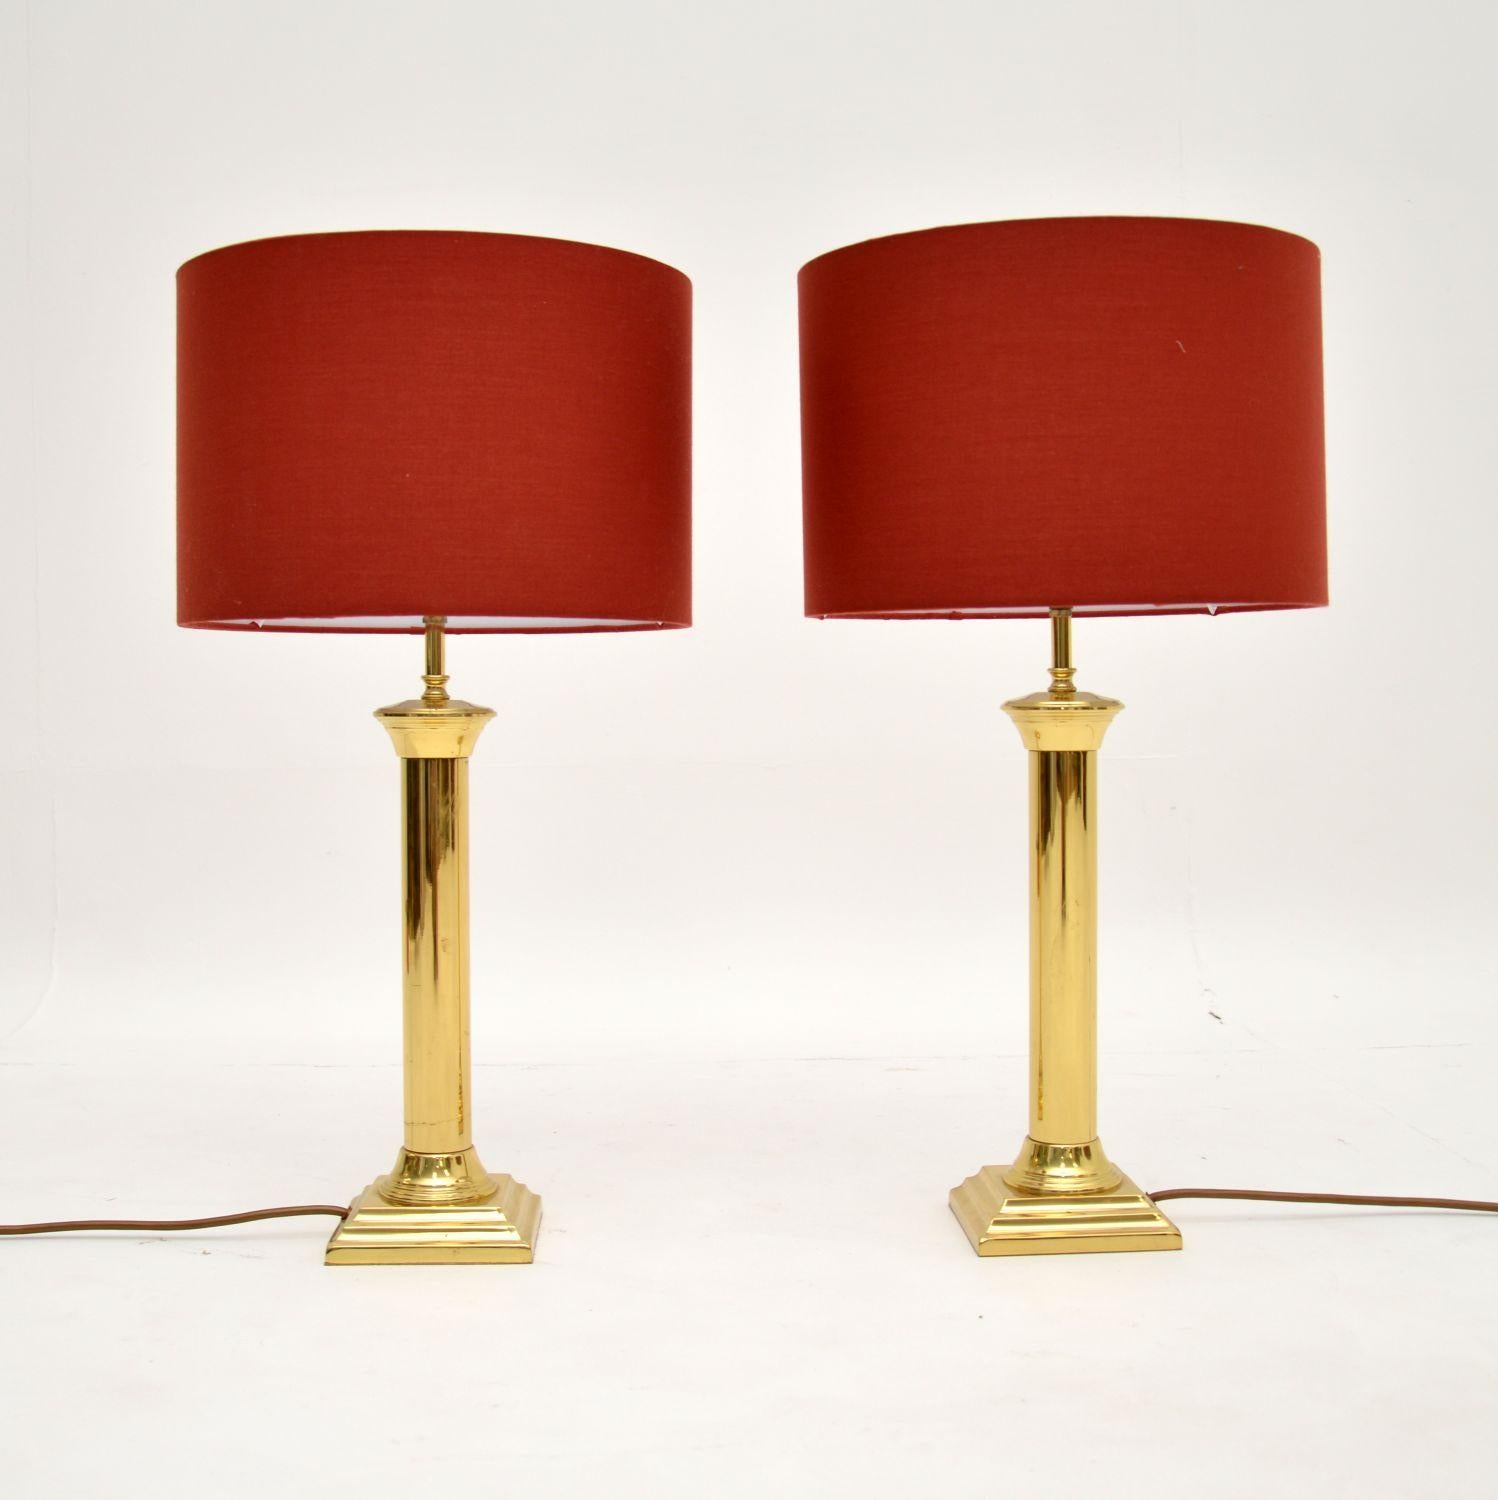 A beautiful pair of vintage brass table lamps. These were made in England, they date from around the 1970’s.

The quality is fantastic, they are really well made and are a good size.

They are in excellent condition for their age, with only some